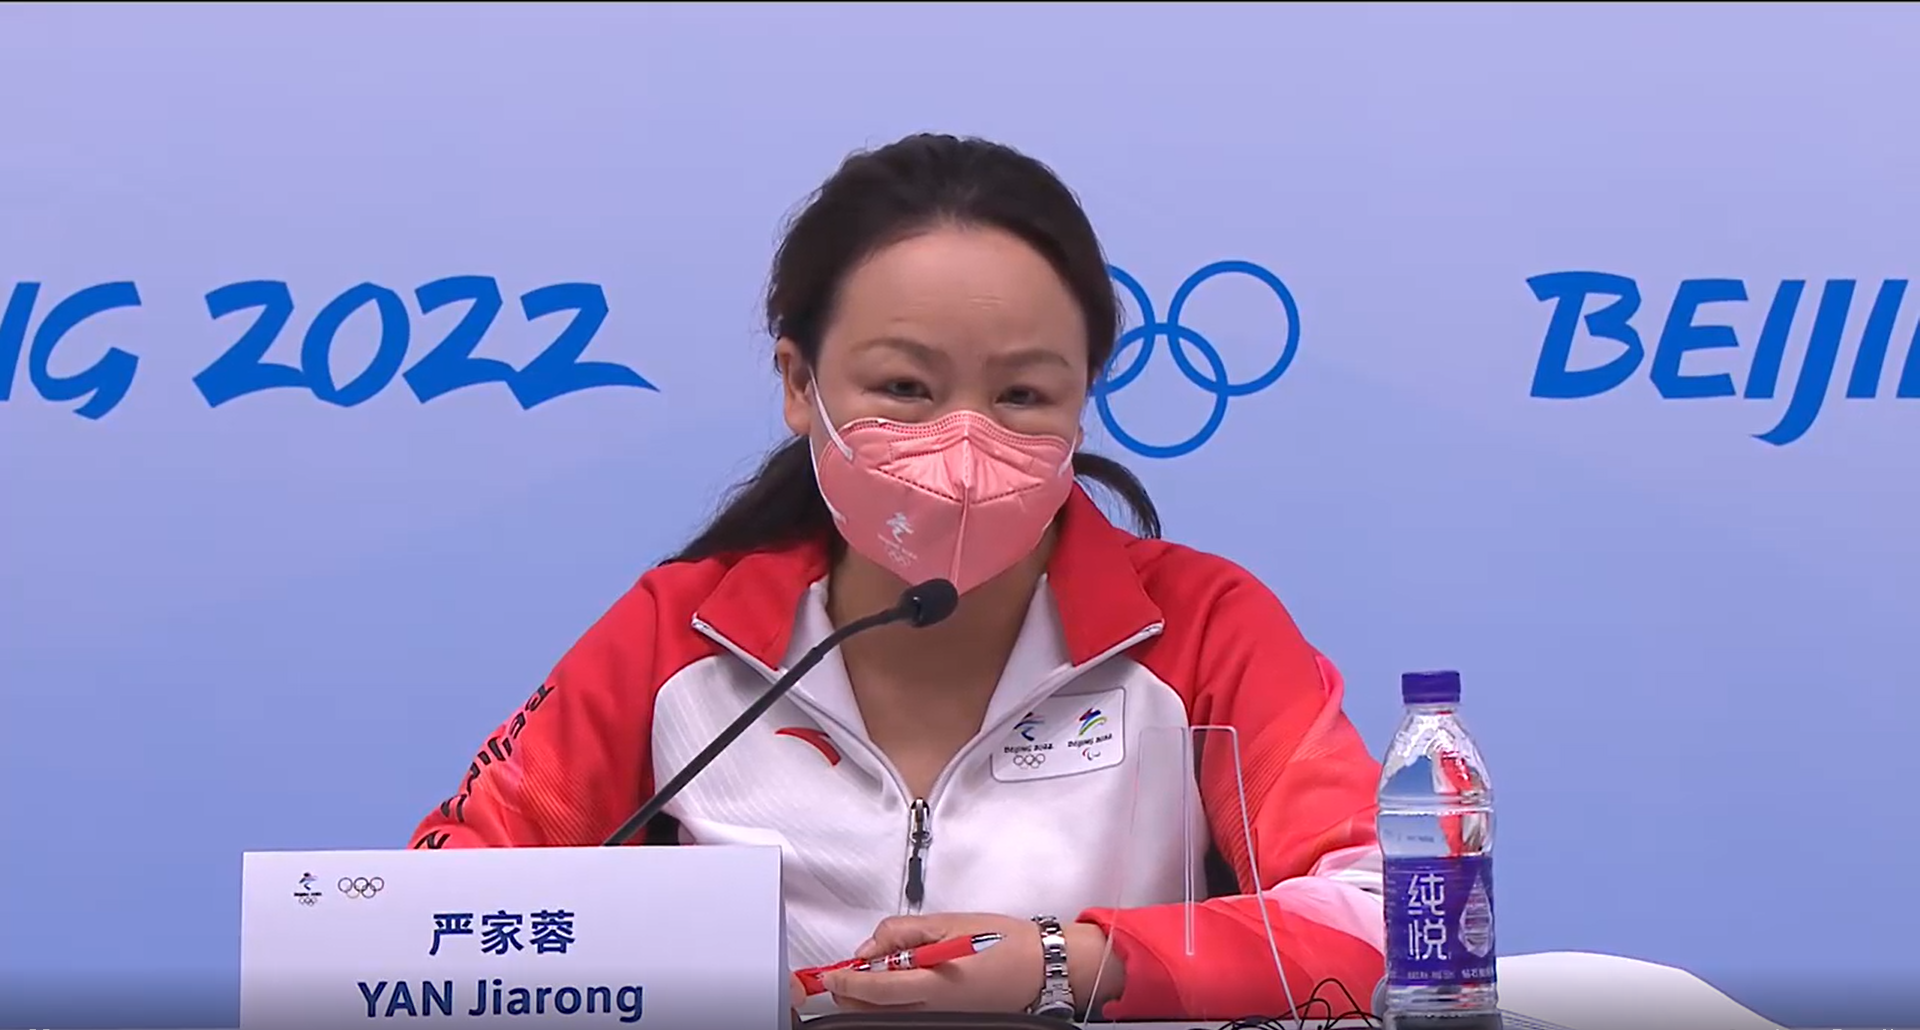 Beijing 2022 spokesperson Yan Jiarong made several political comments in front of the Olympic rings ©IOC